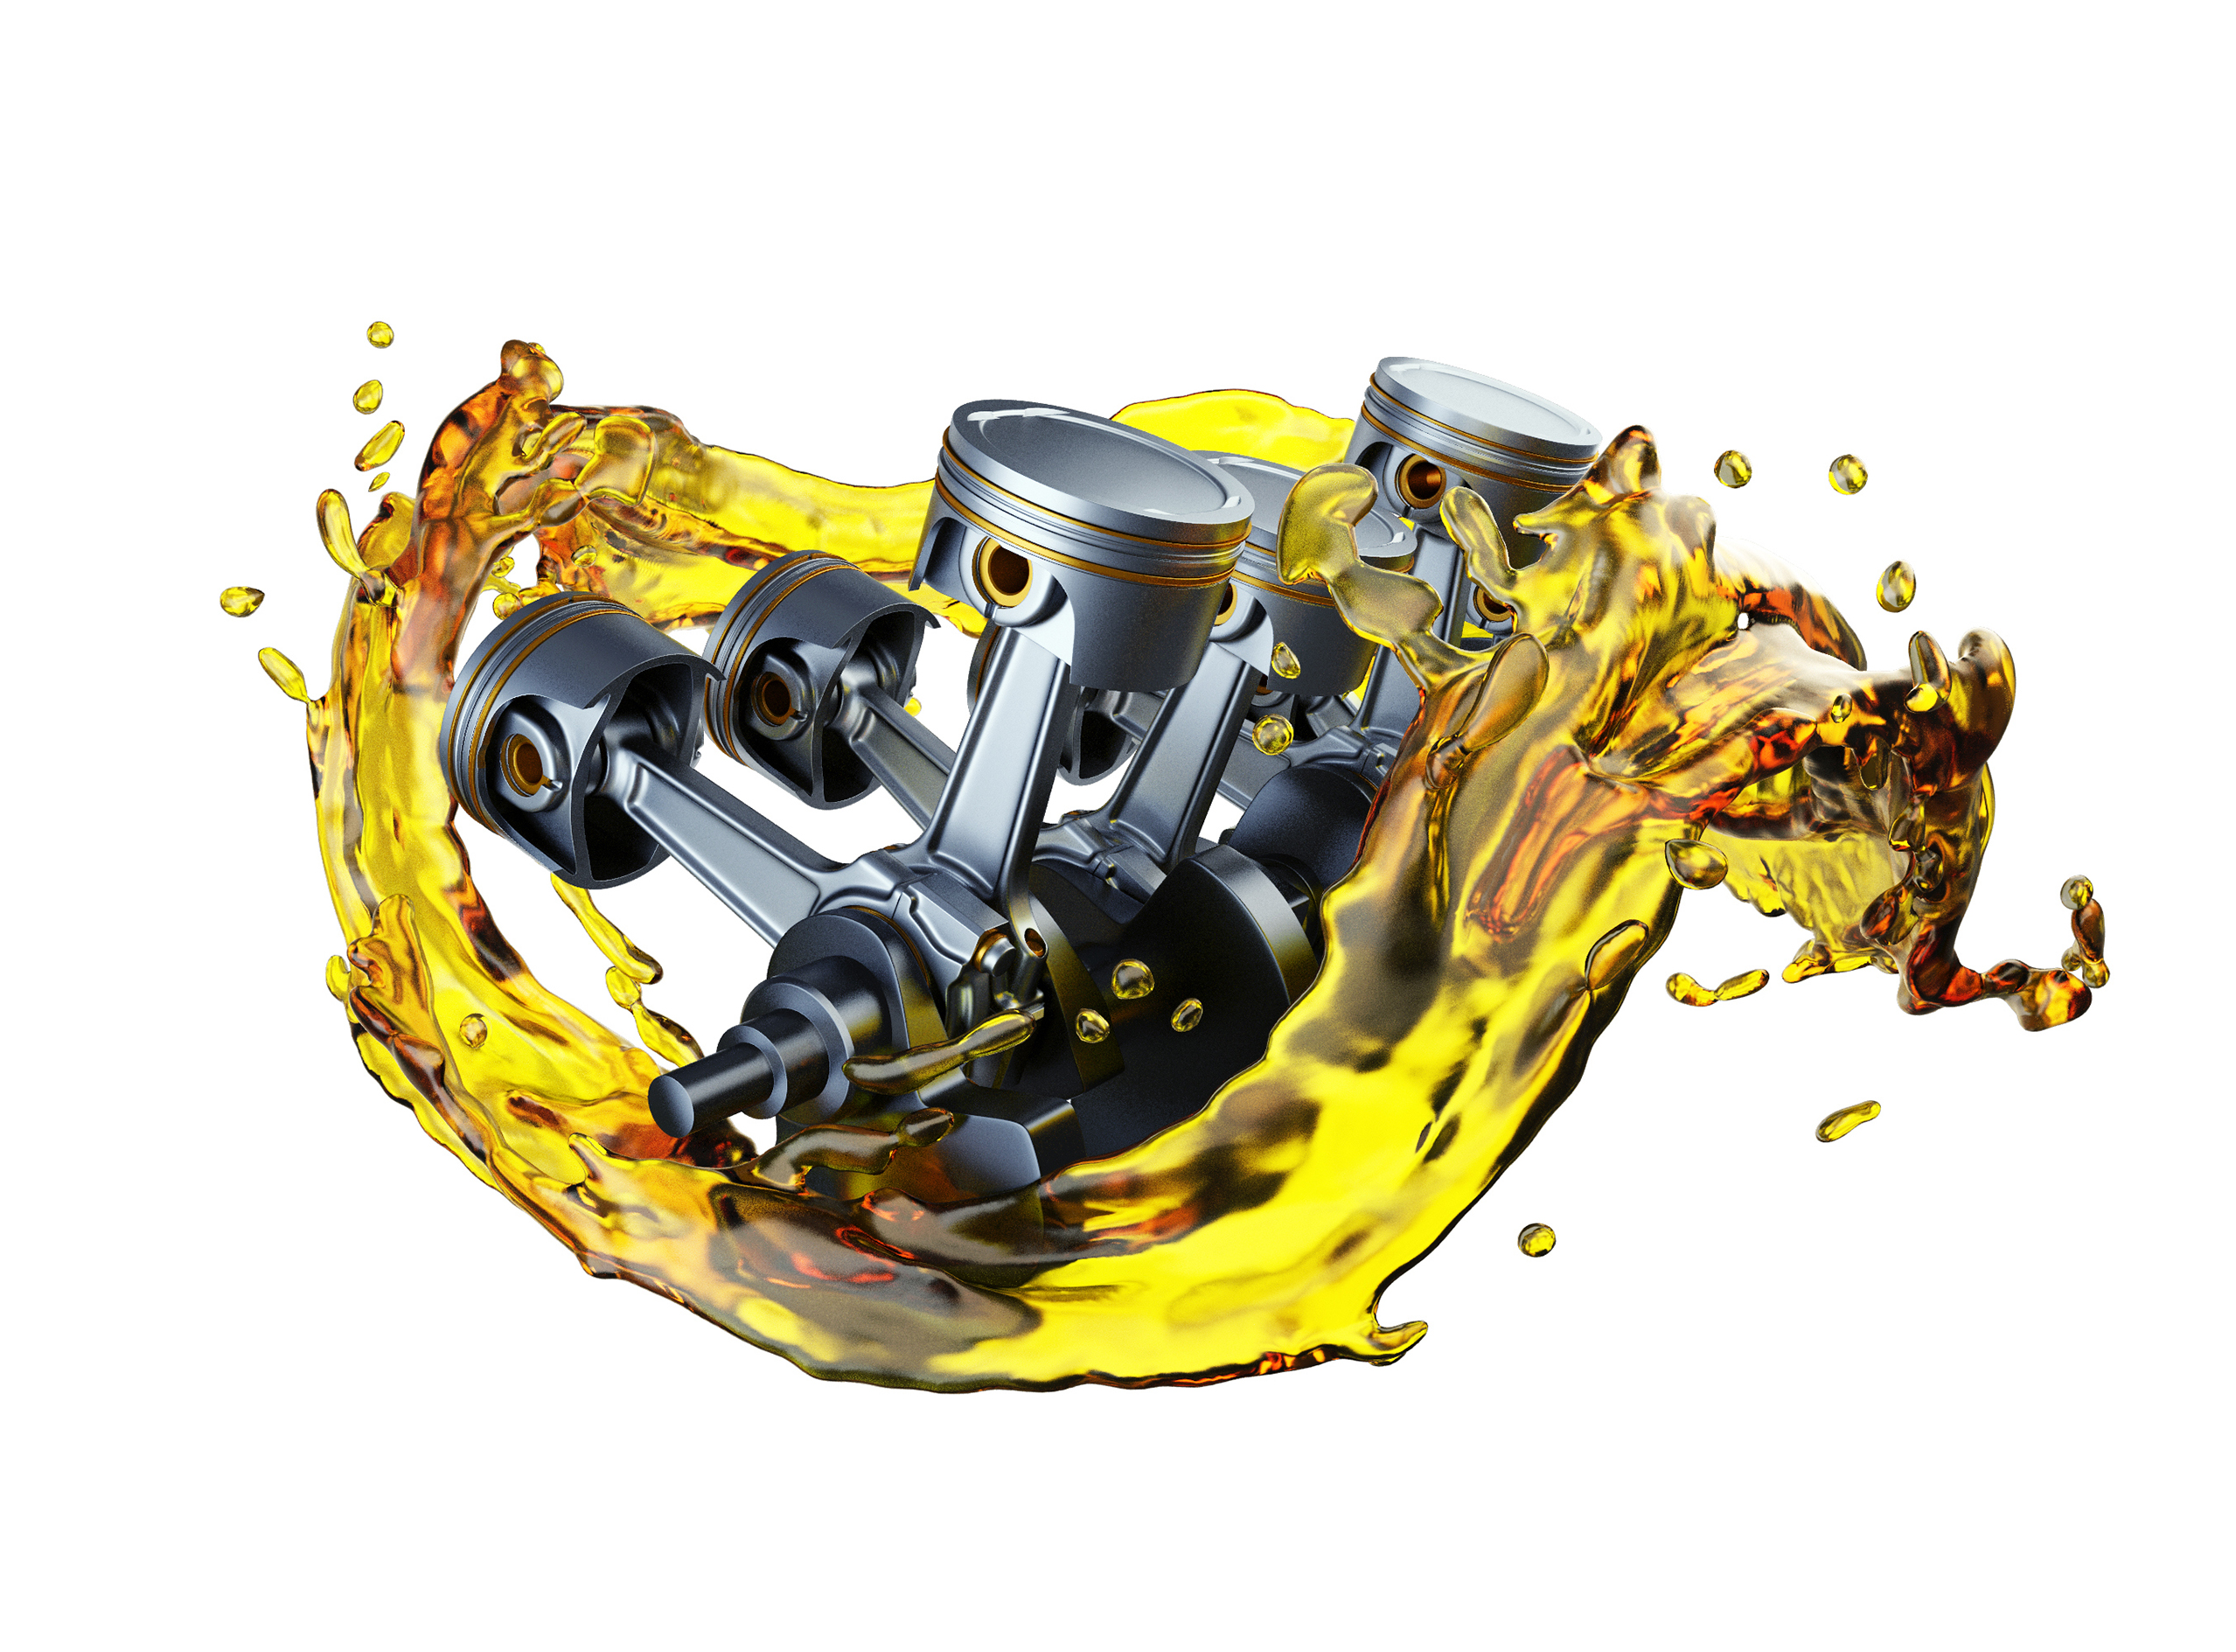 Best Engine Oil For Performance & Fuel Economy